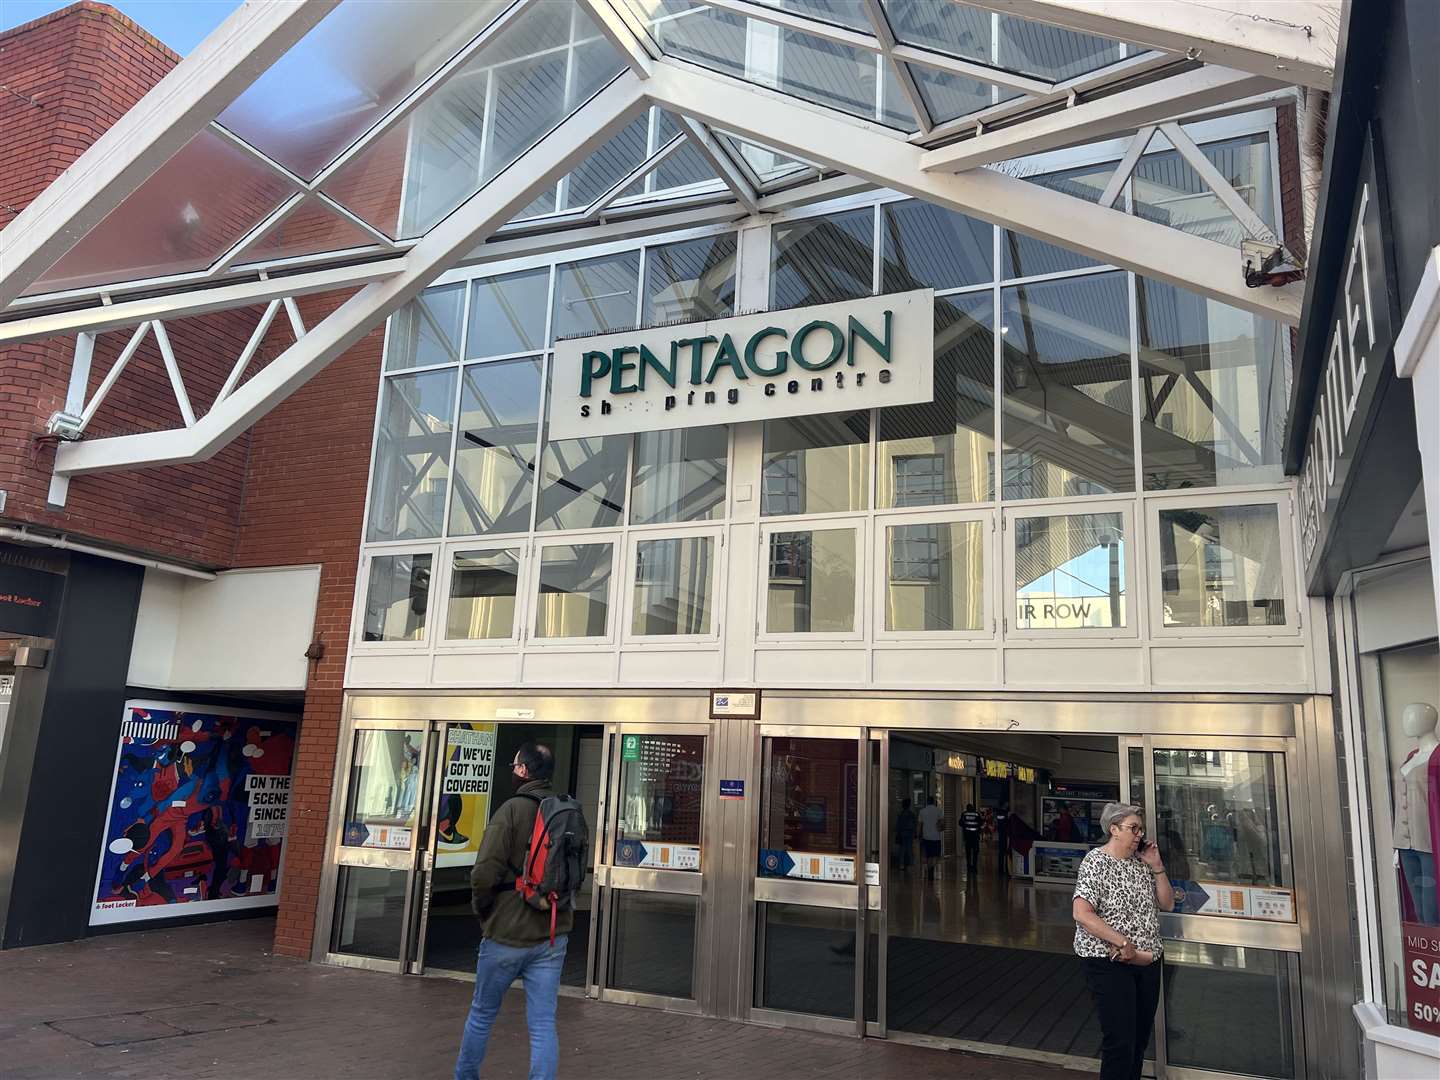 The Pentagon shopping centre in Chatham